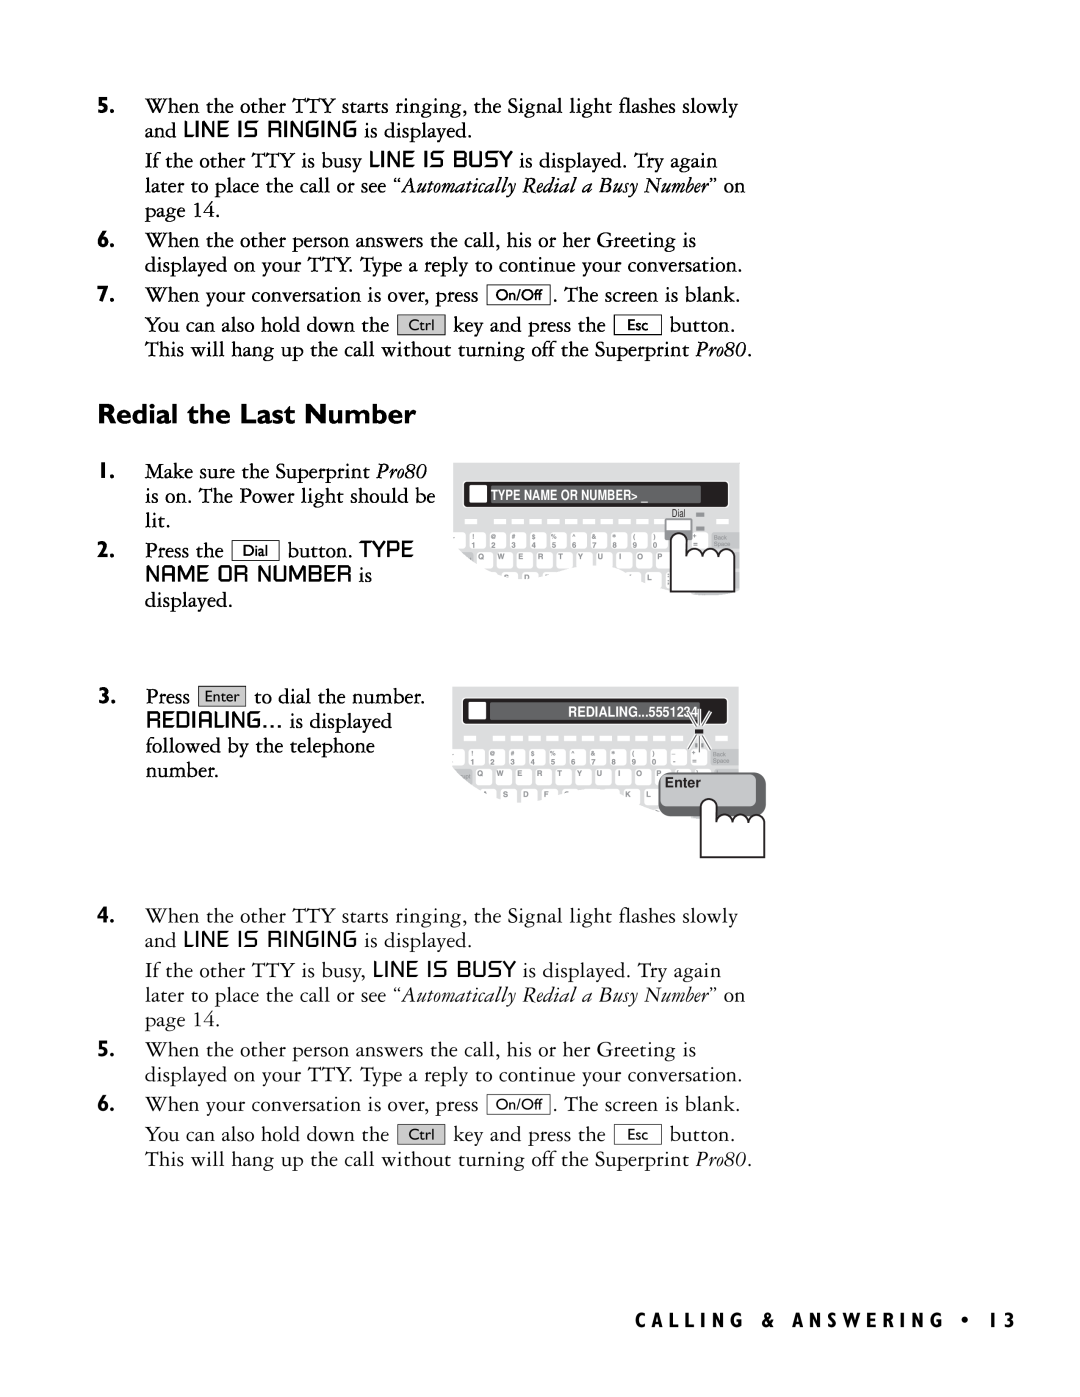 Ultratec PRO80TM manual Redial the Last Number, REDIALING... is displayed followed by the telephone number 